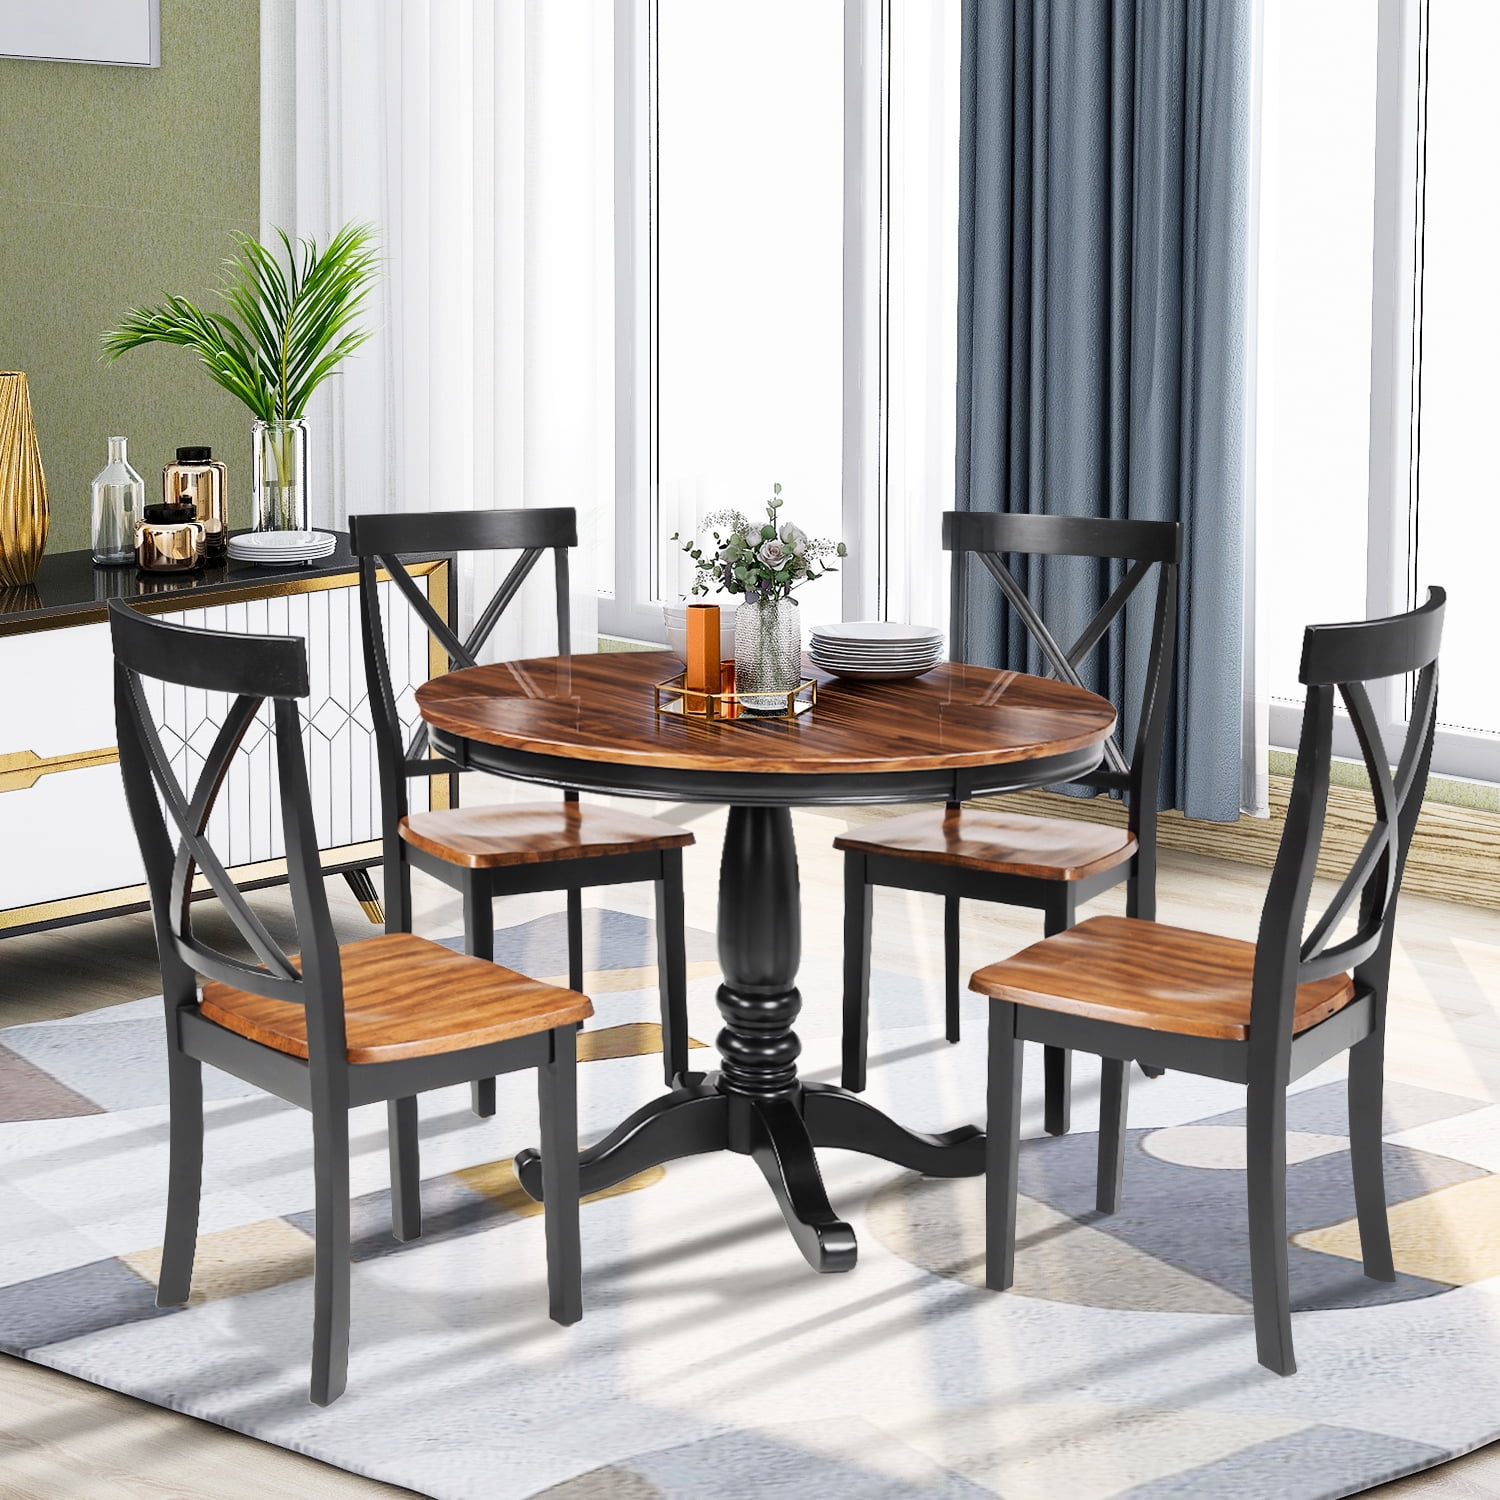 Wooden Circle Kitchen Dining Table Set, Round Dining Table Small Space